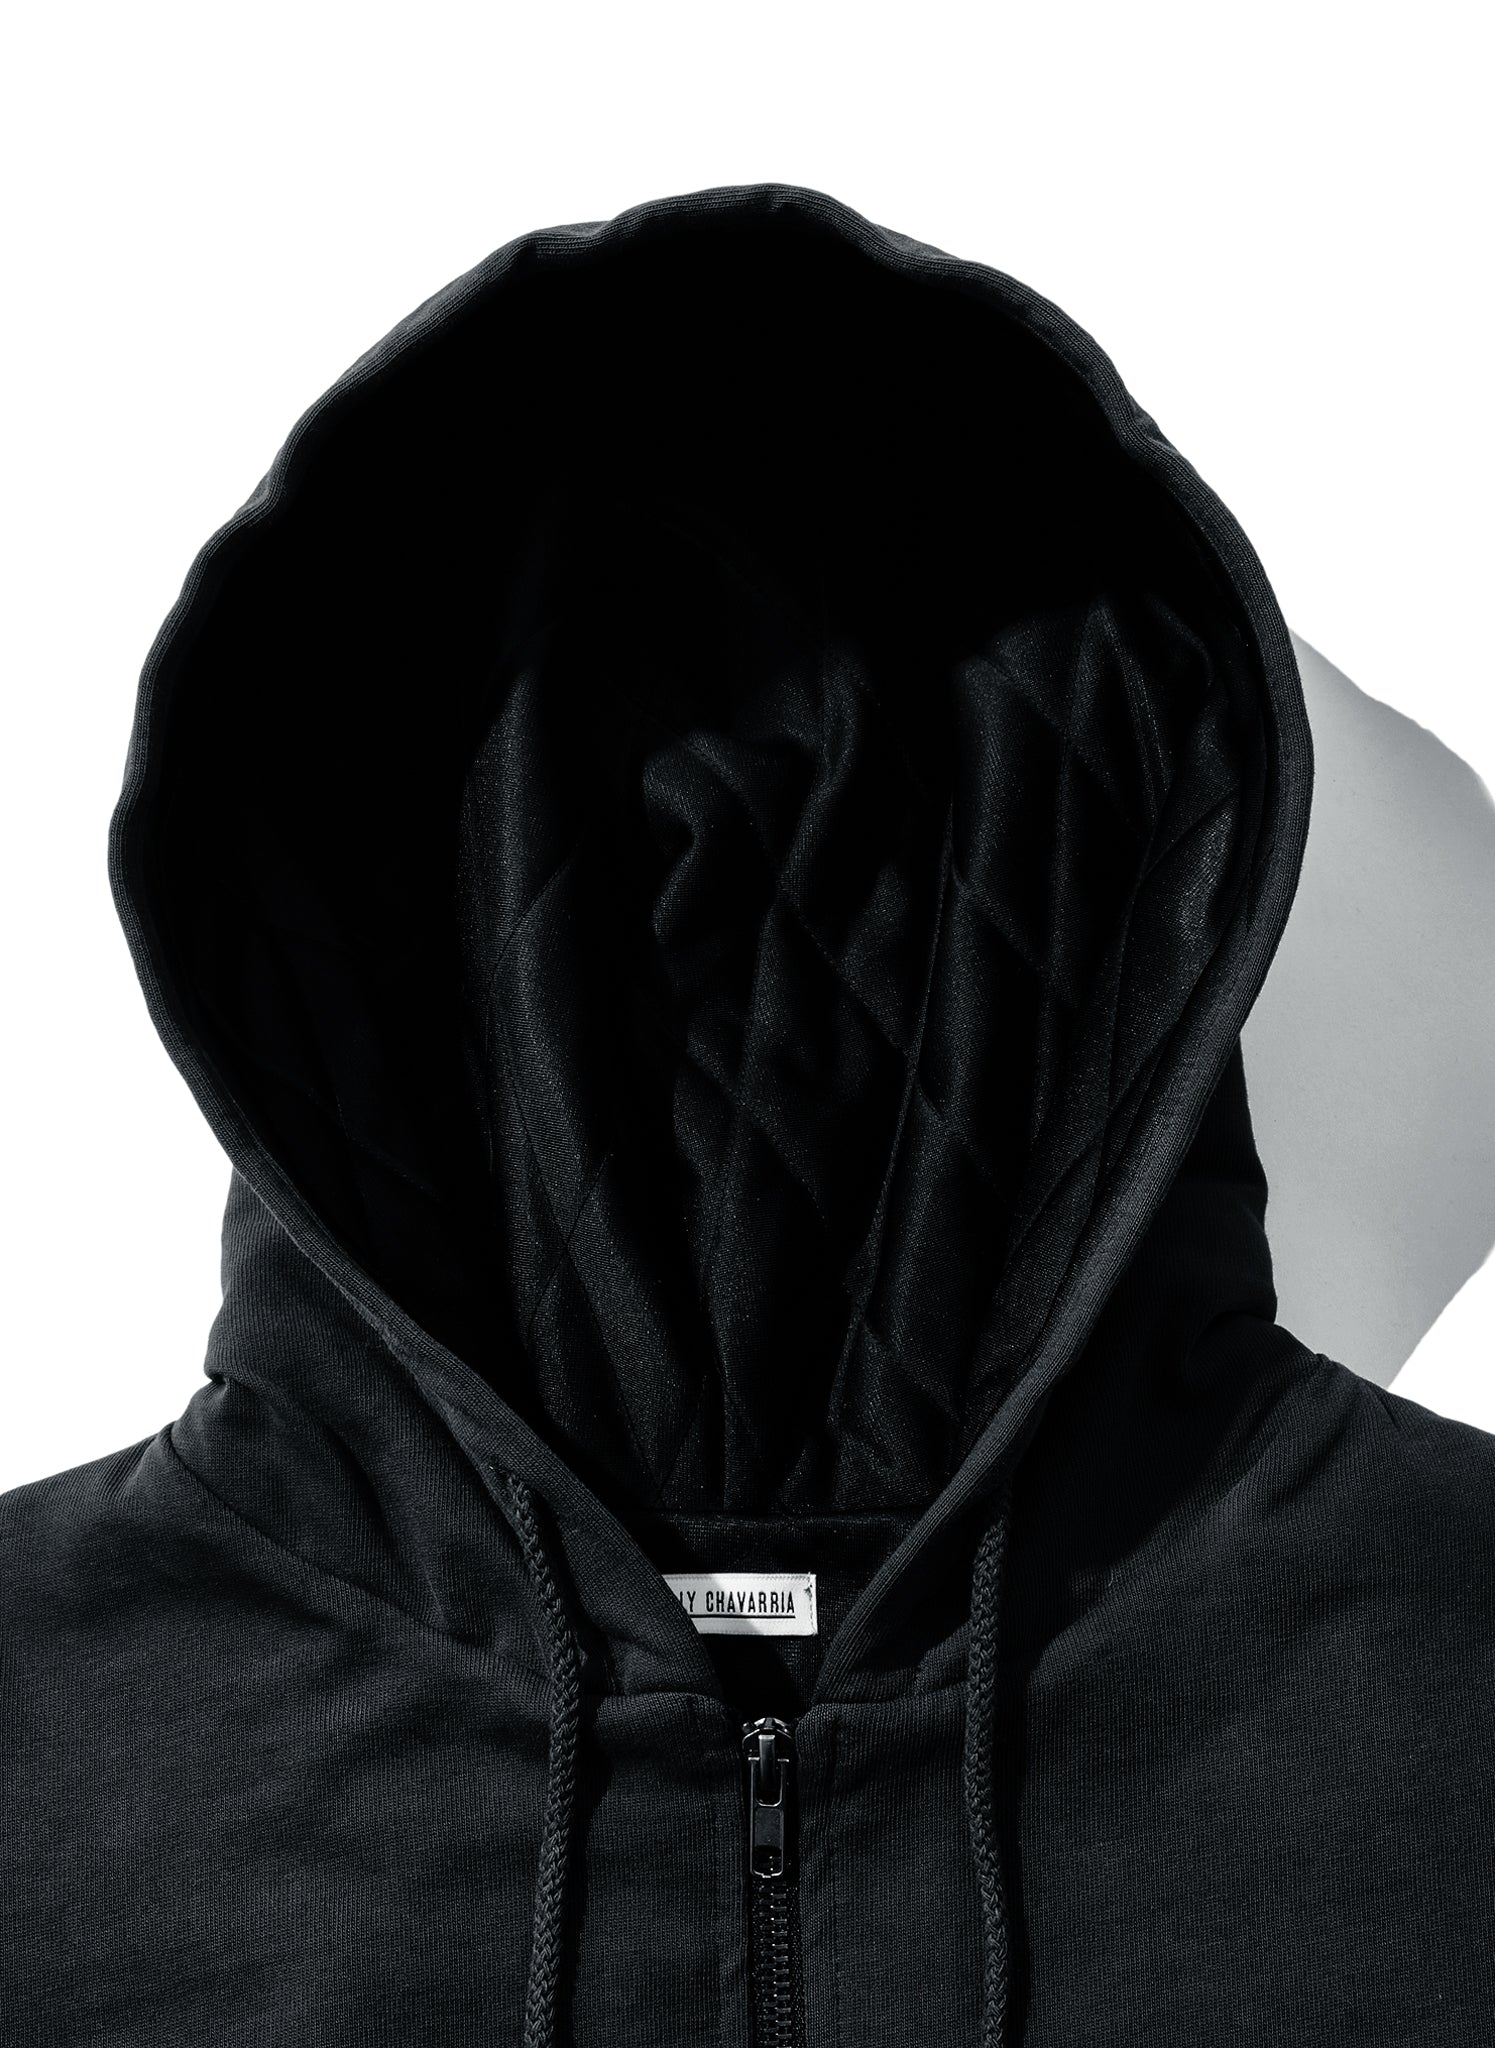 WILLY CHAVARRIA / QUILTED LINED RAVE CULTURE ZIP HOODIE SOLID BLACK